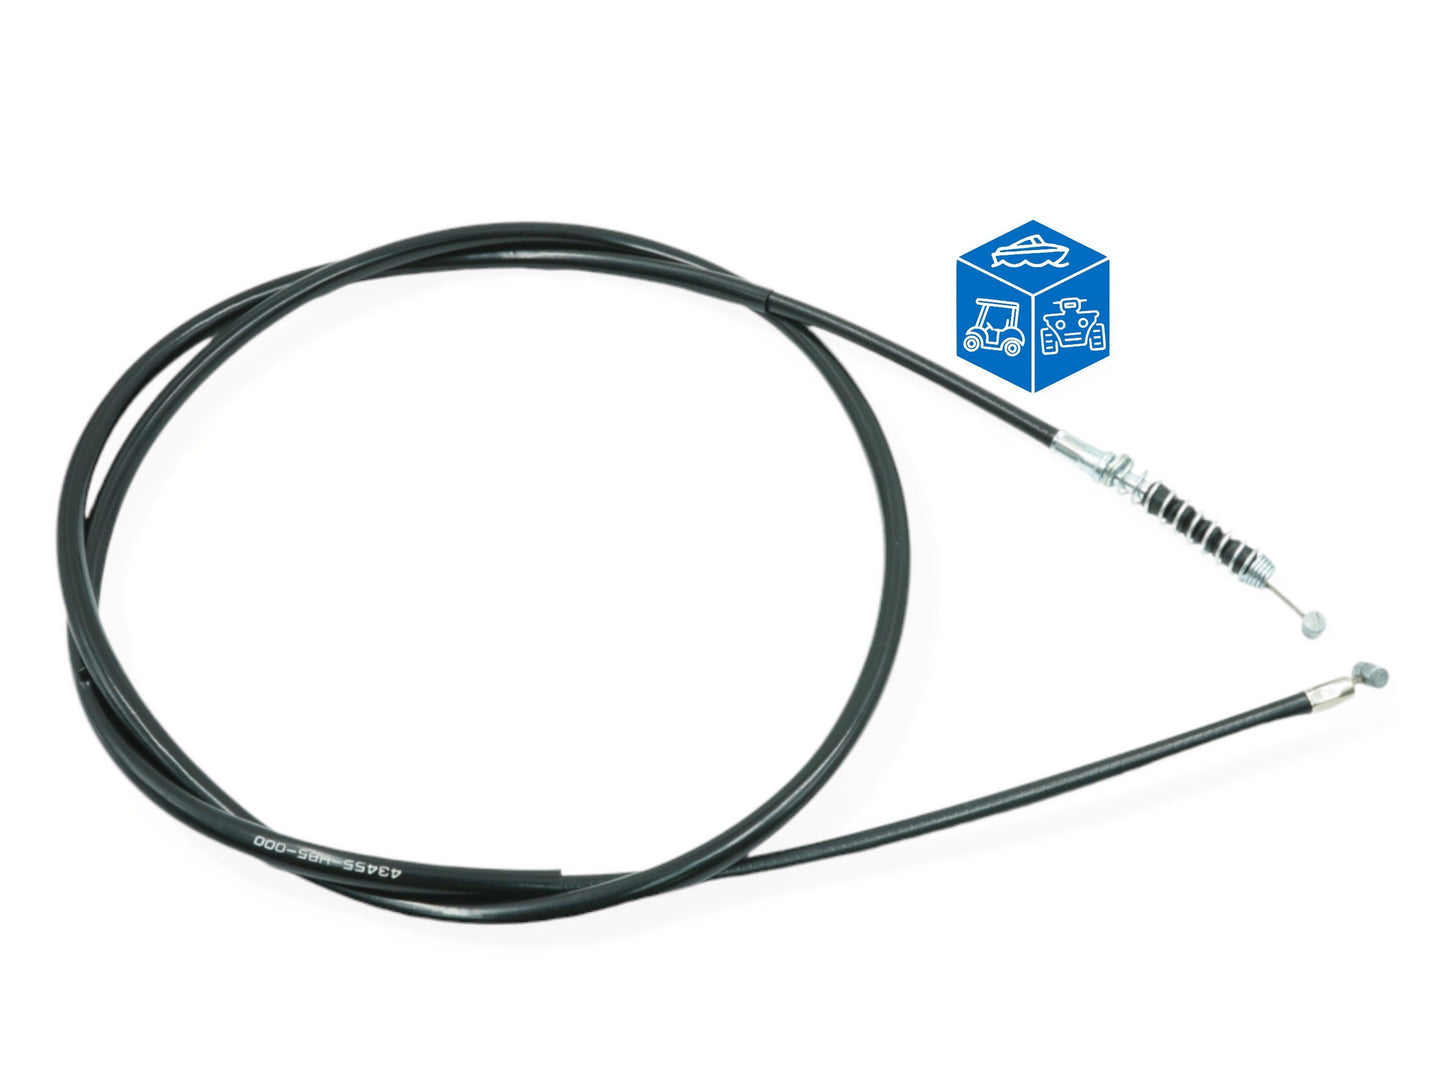 New Replacement Rear Hand Brake Cable Fits Honda TRX250x 1987-1991 Vintage